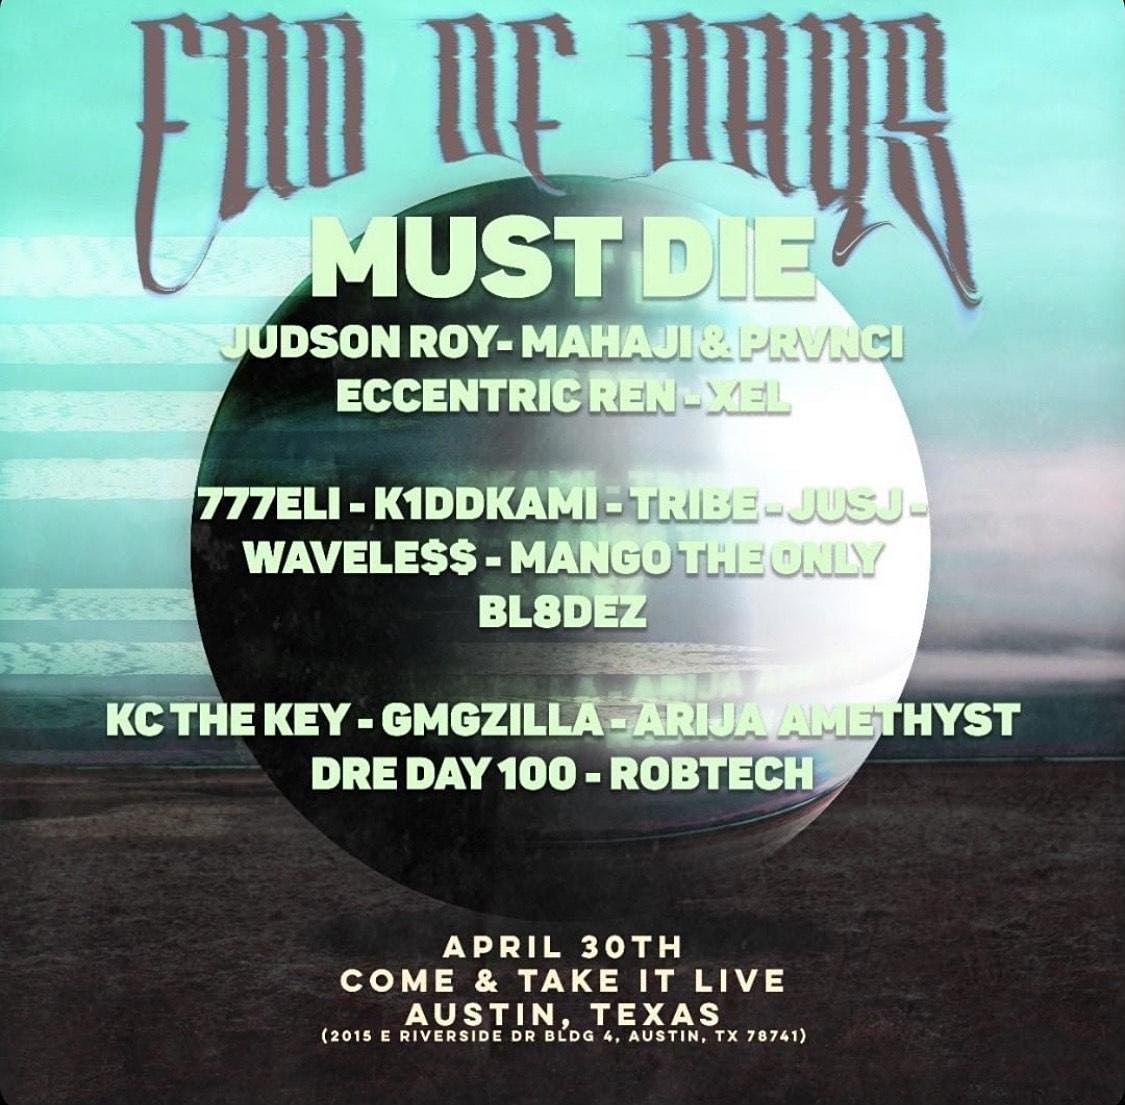 MustDie presents: The End of Days Showcase